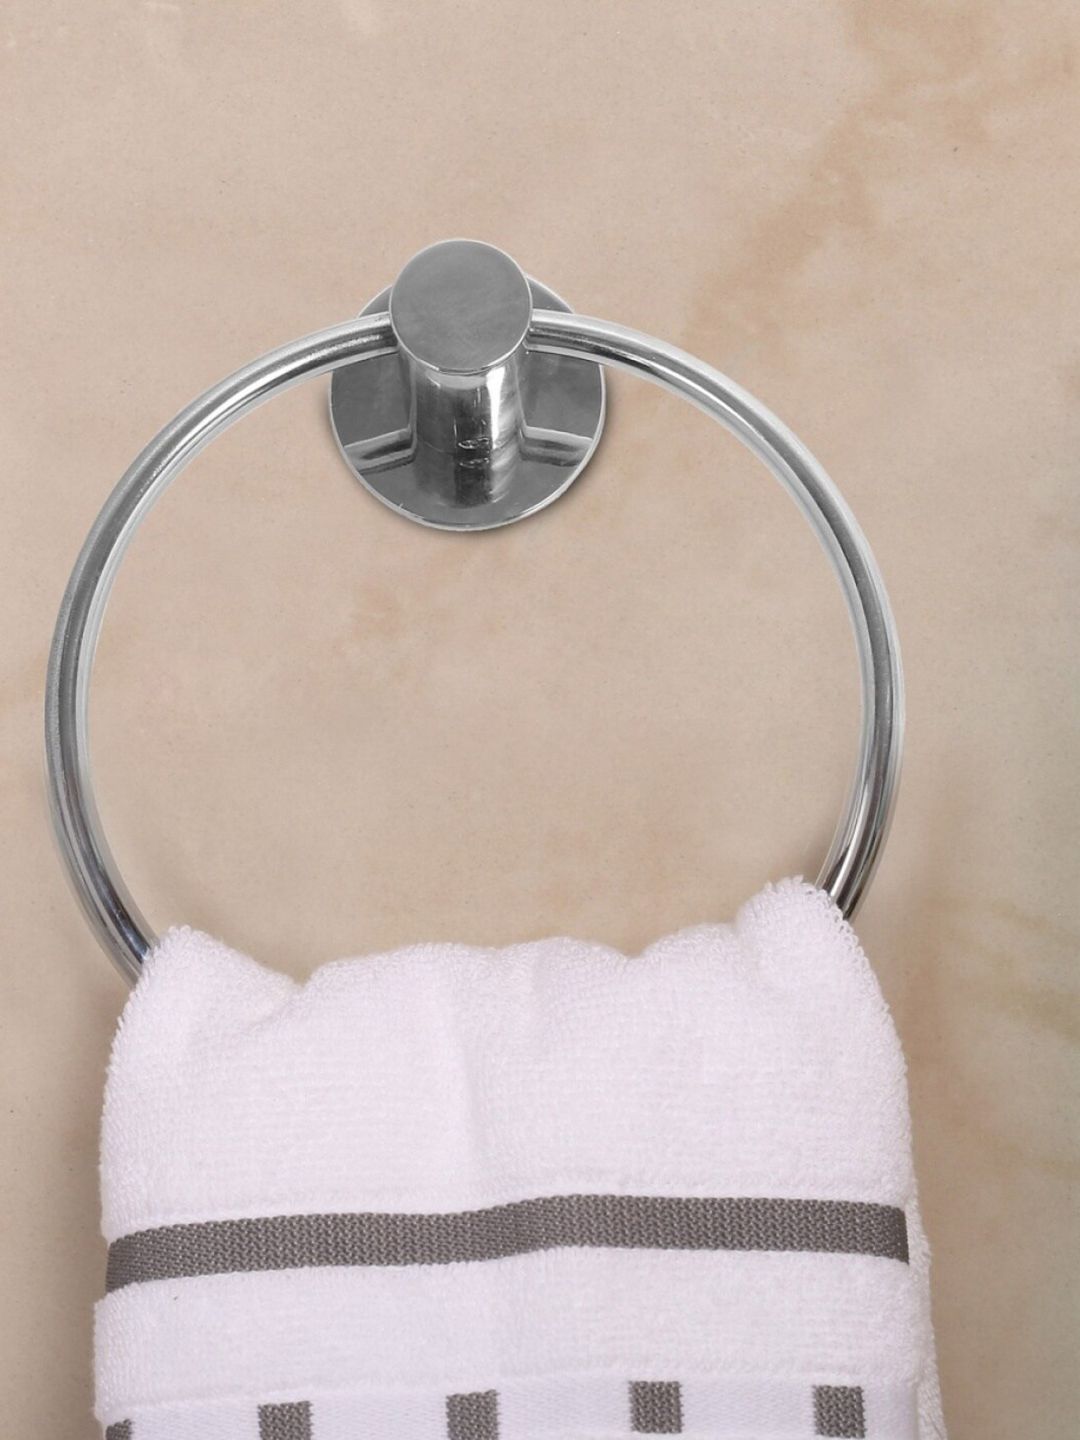 Home Centre Silver-Toned Adrian Aeron Round Towel Ring Price in India